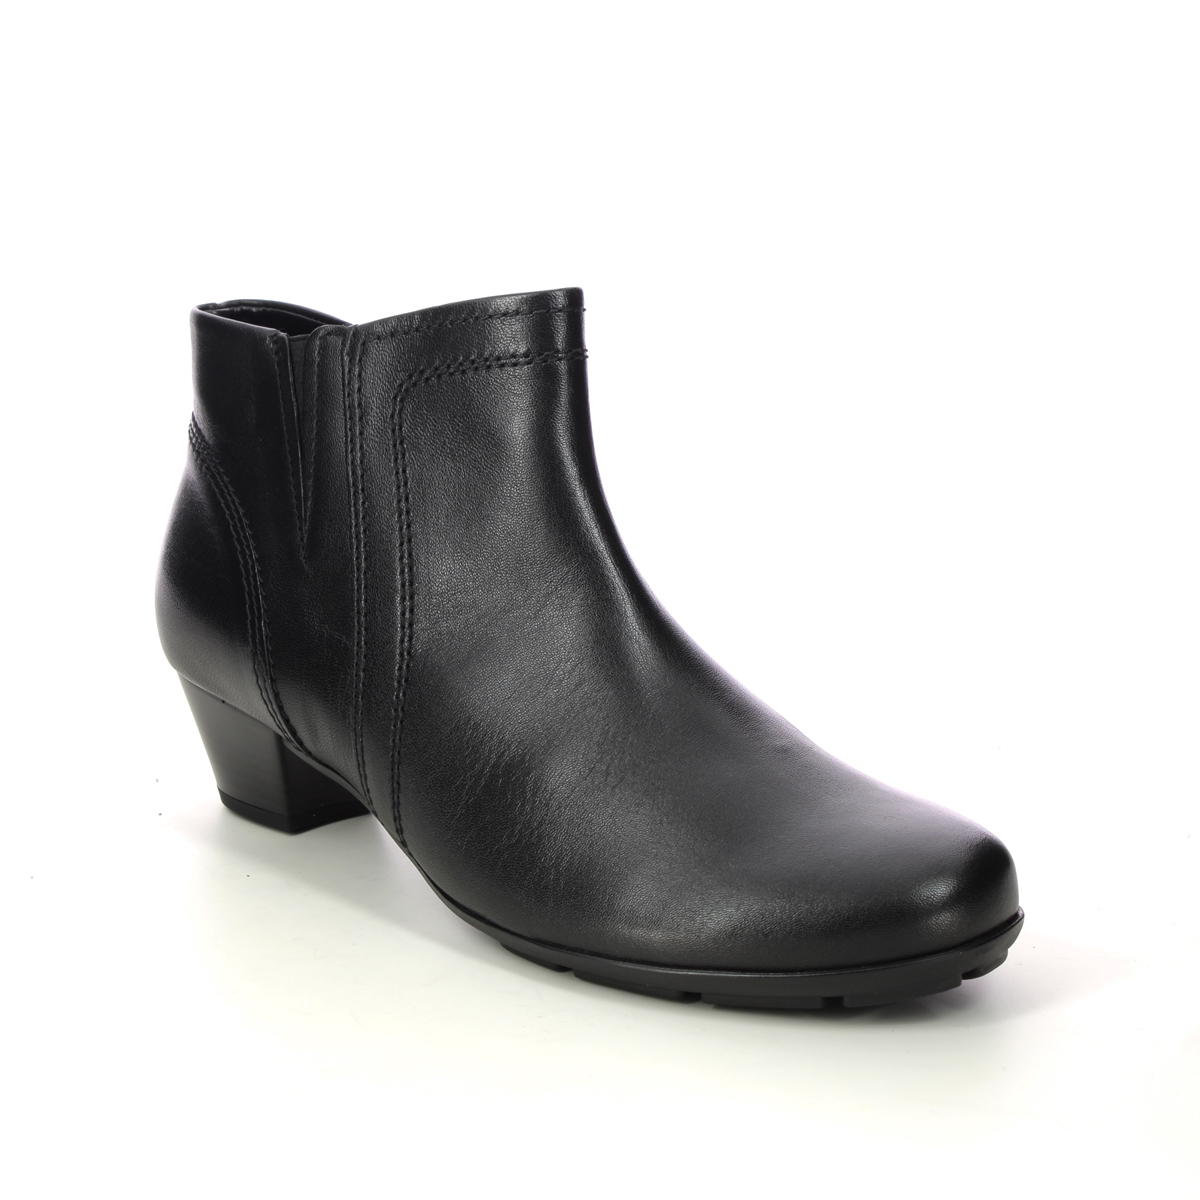 Gabor Heritage Trudy Black leather Womens ankle boots 35.638.27 in a Plain Leather in Size 8